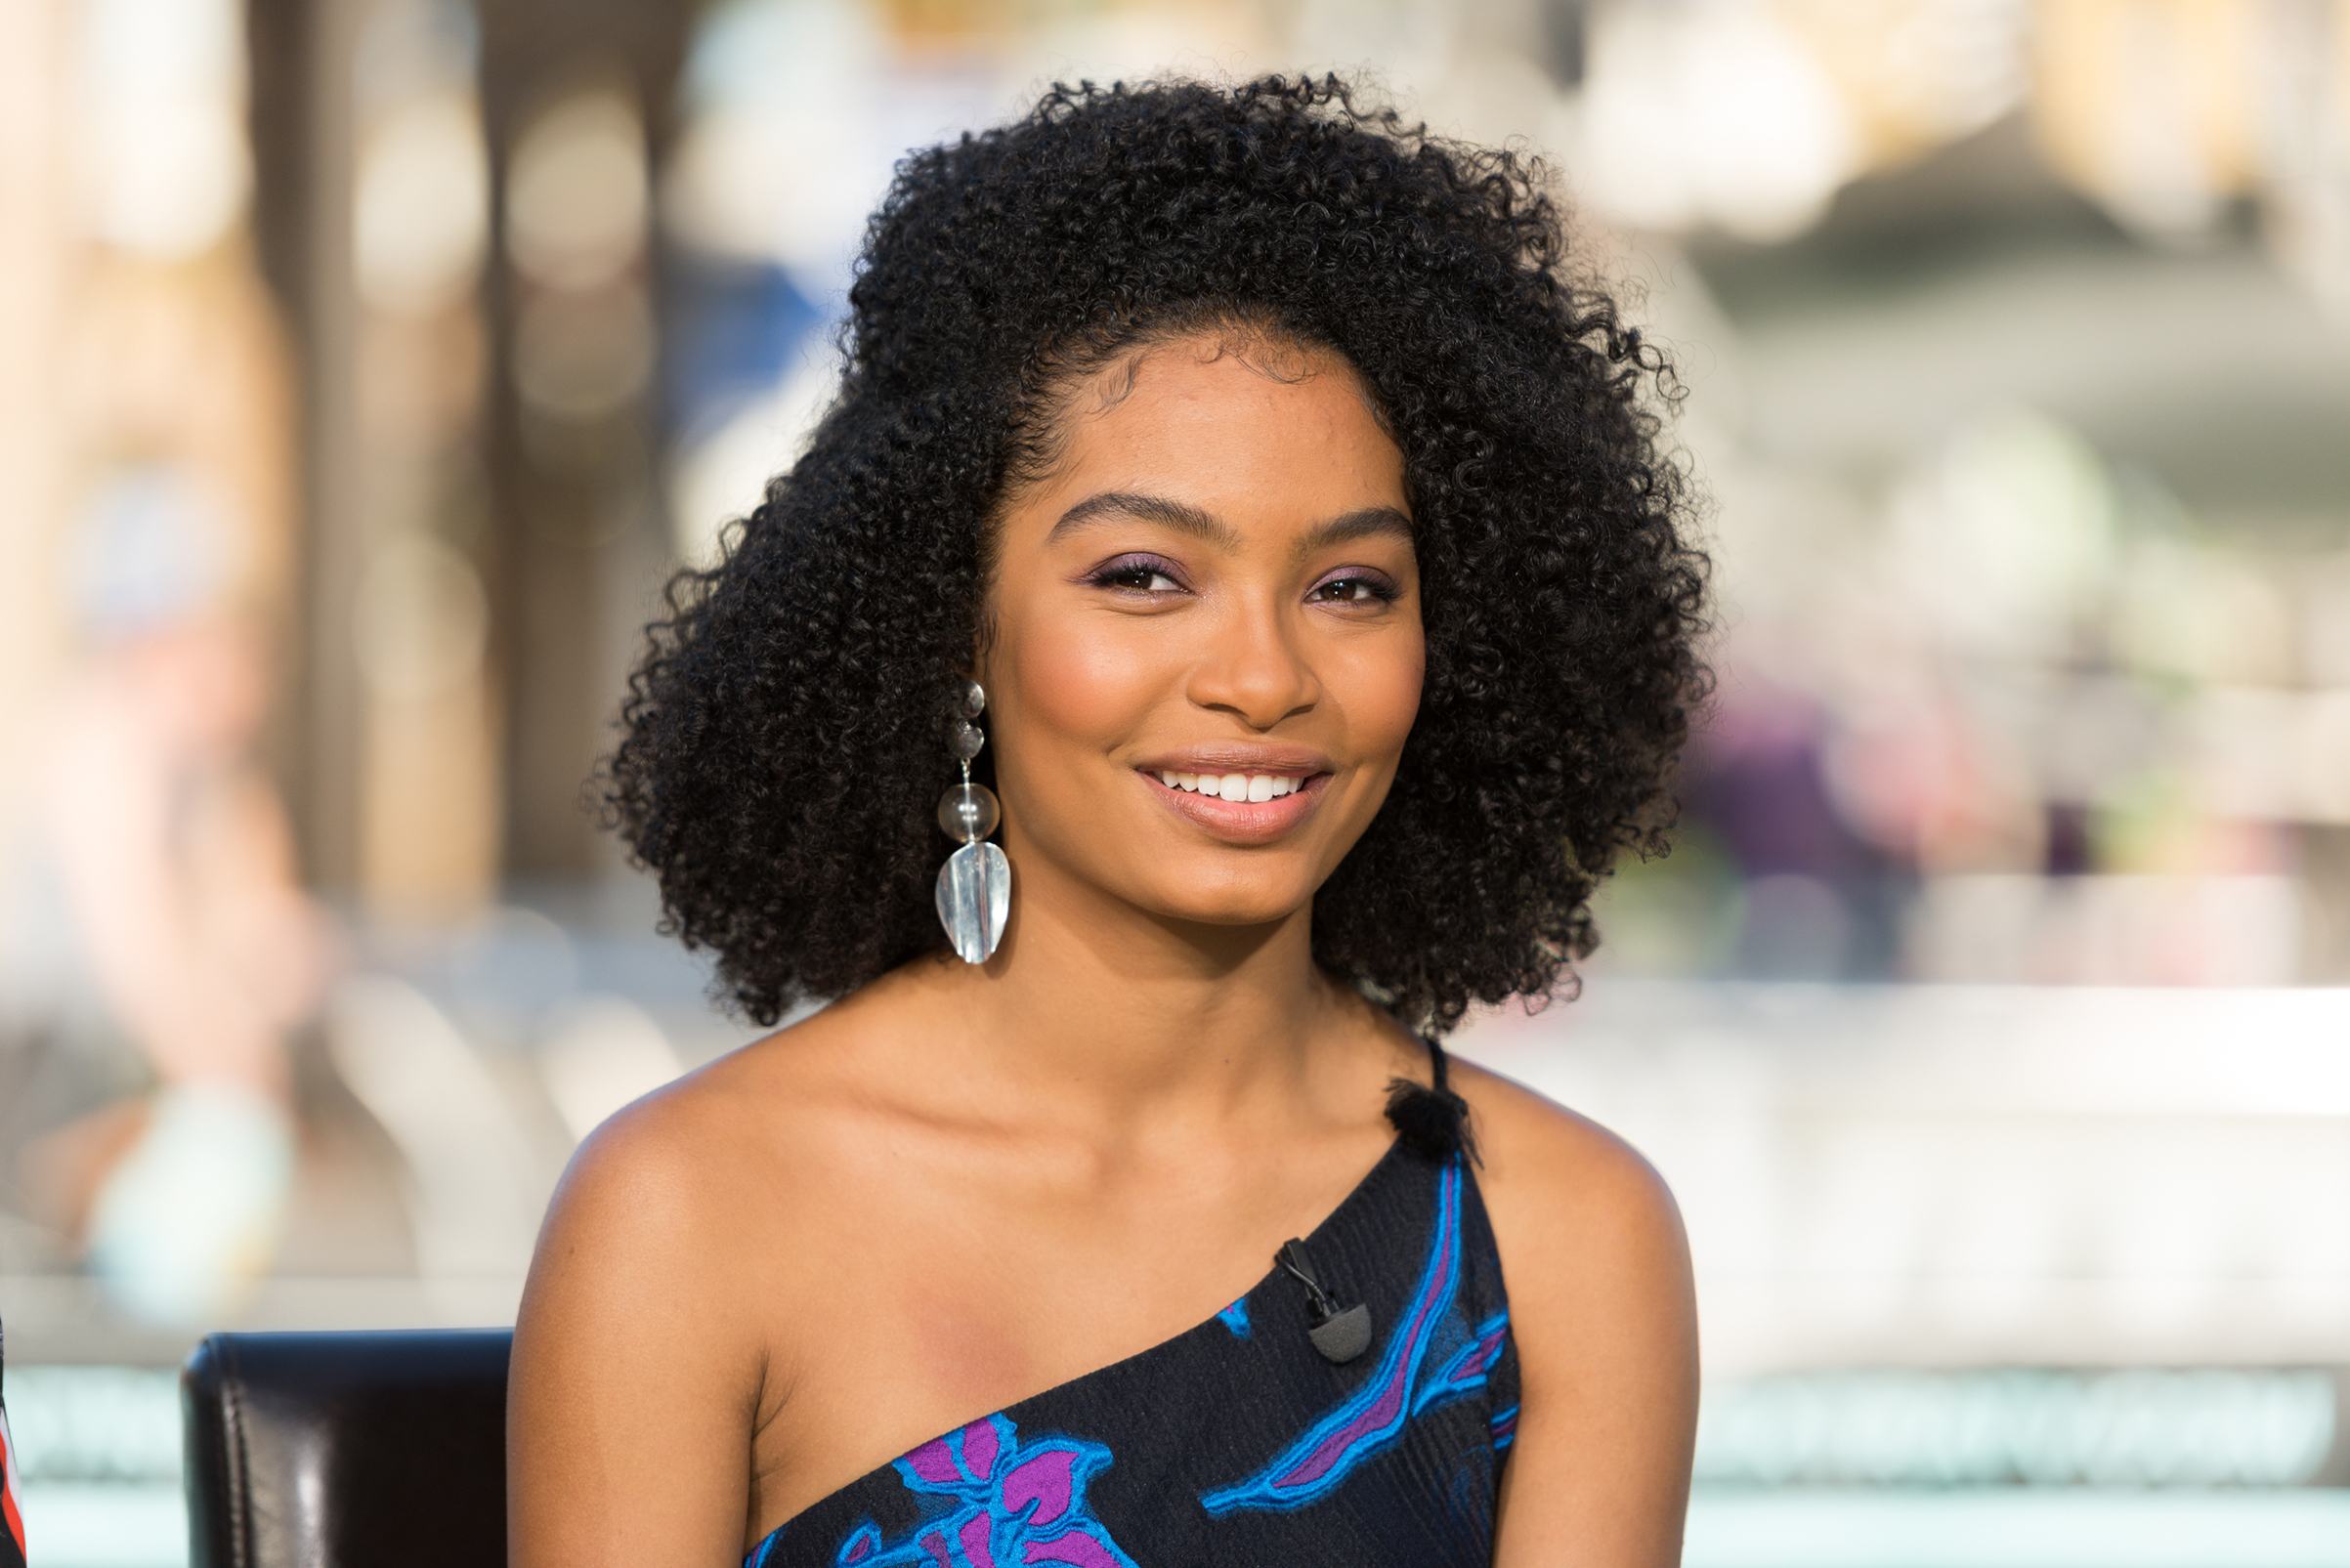 Black-ish star Shahidi is getting her own spin-off, grown-ish, before heading off to college herself next fall. (Noel Vasquez—Getty Images)